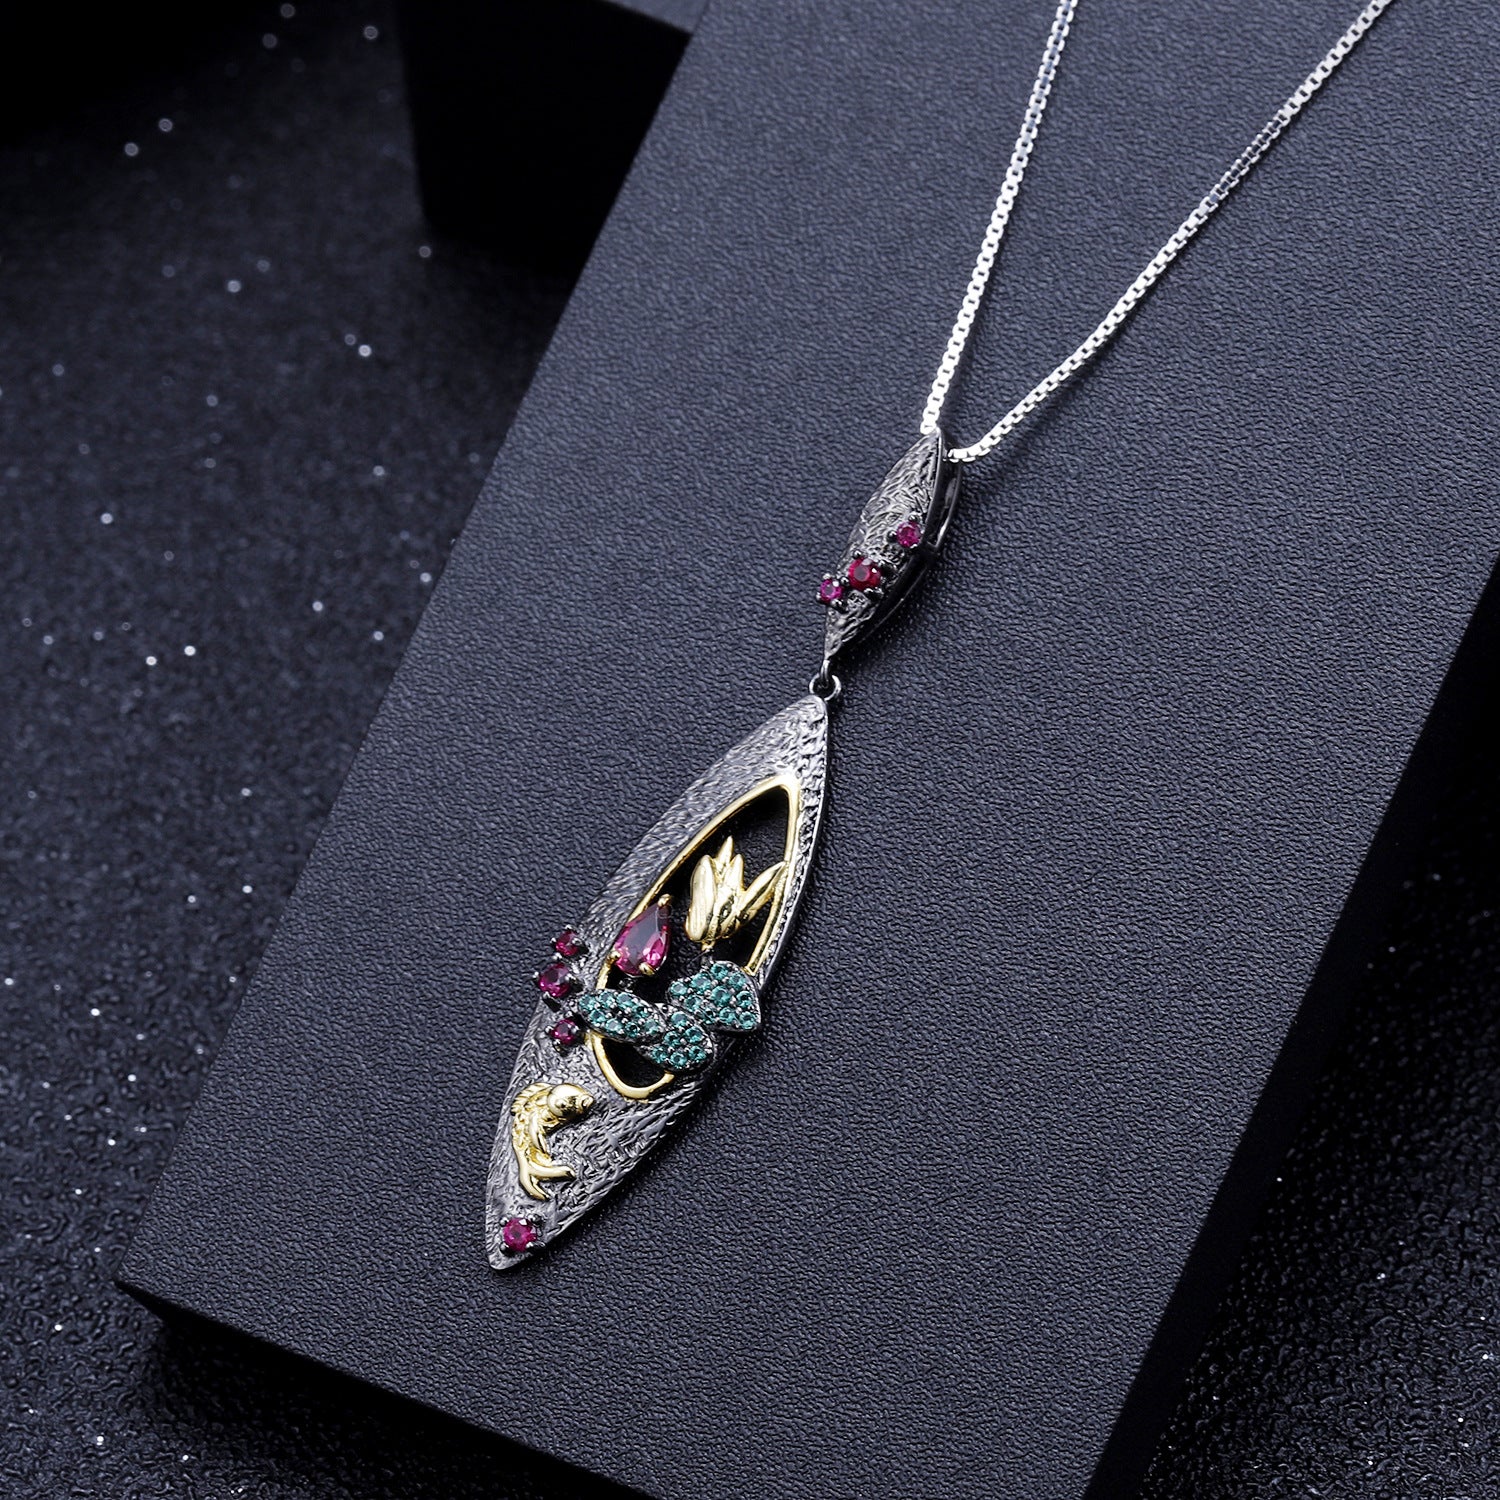 Secret Series Design with High Sense of Natural Wind Natural Rose Pomegranate Pendant Silver Necklace for Women